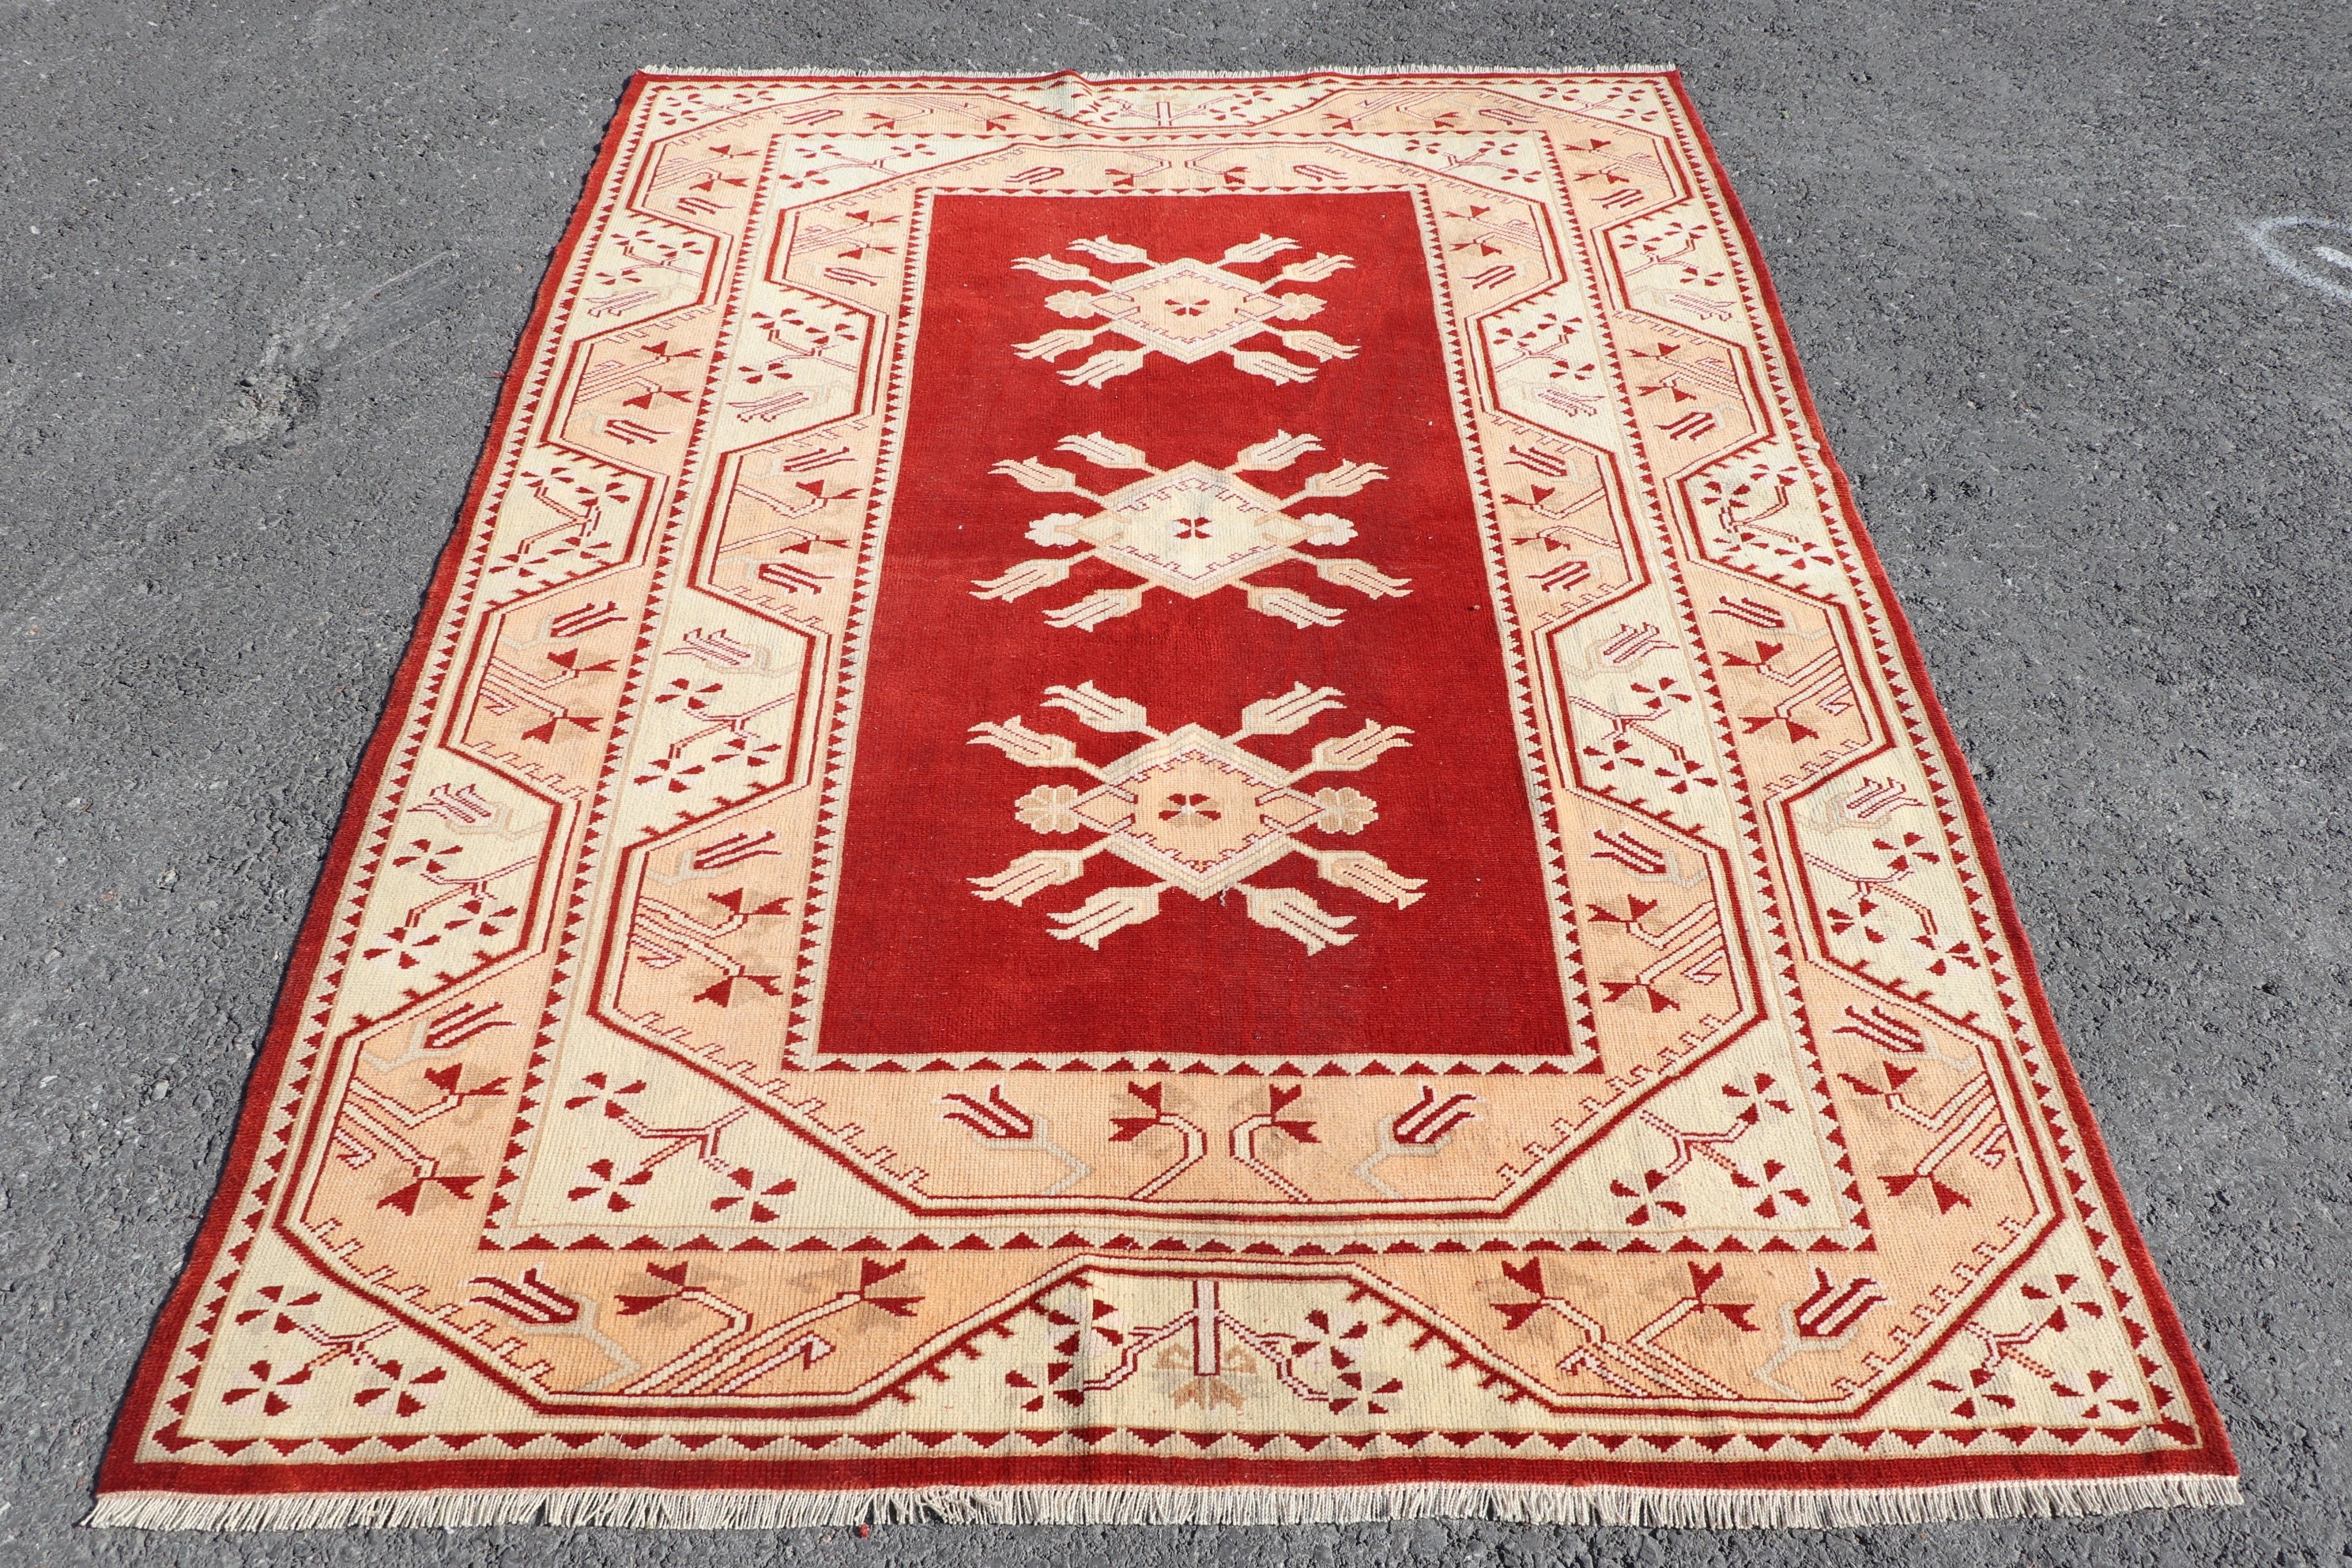 4.9x6.7 ft Area Rugs, Cool Rug, Rugs for Bedroom, Home Decor Rug, Pale Rug, Vintage Rug, Turkish Rugs, Vintage Decor Rug, Red Bedroom Rug